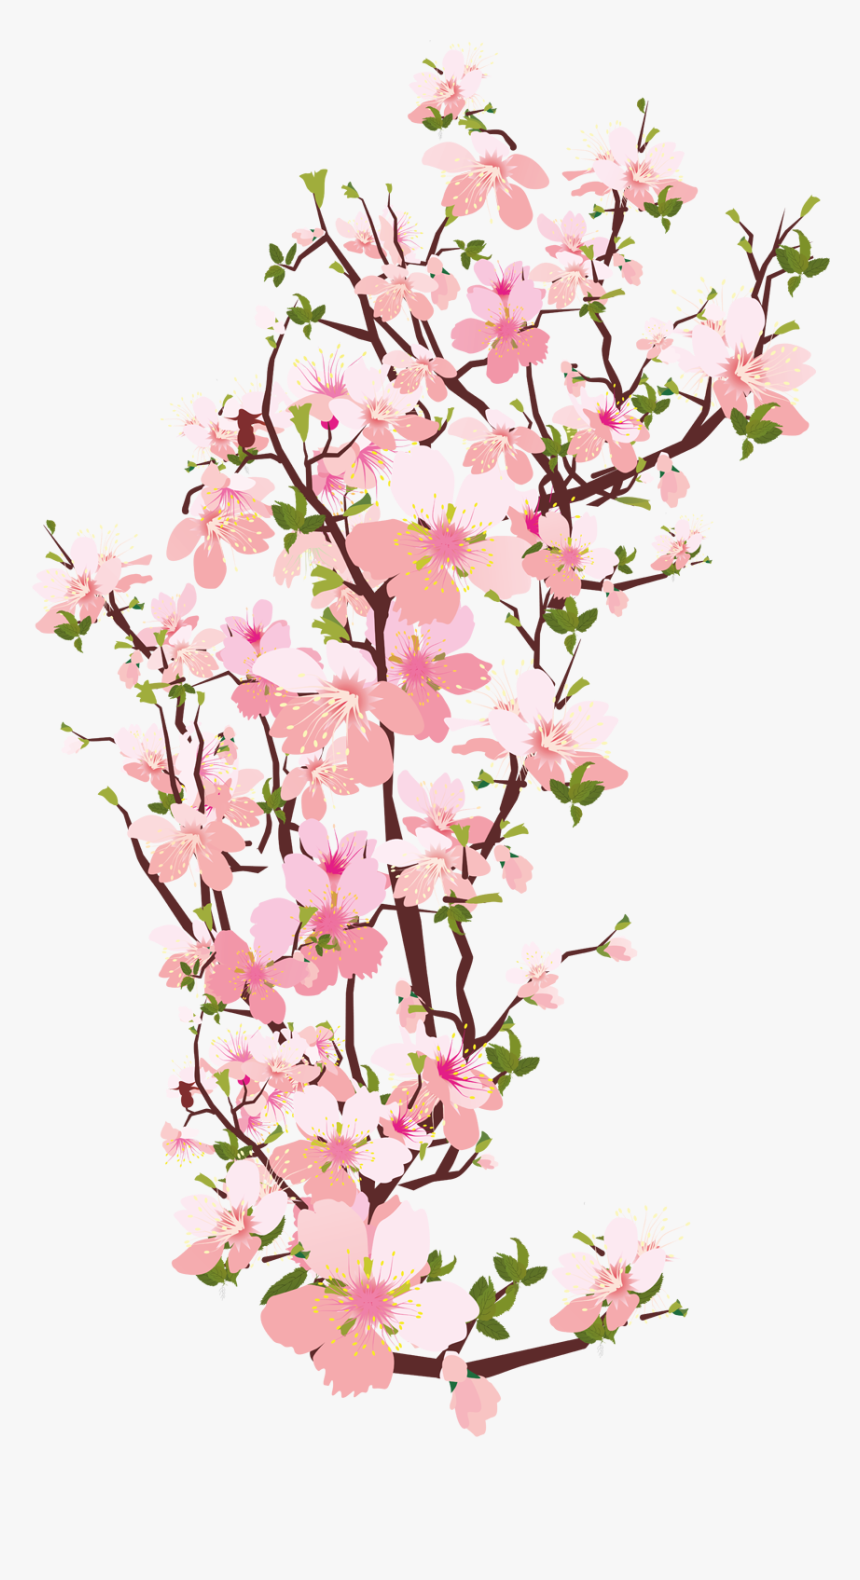  sakura Hotuna Png - Cherry Blossom Flower Png, Transparent Png, Free Download